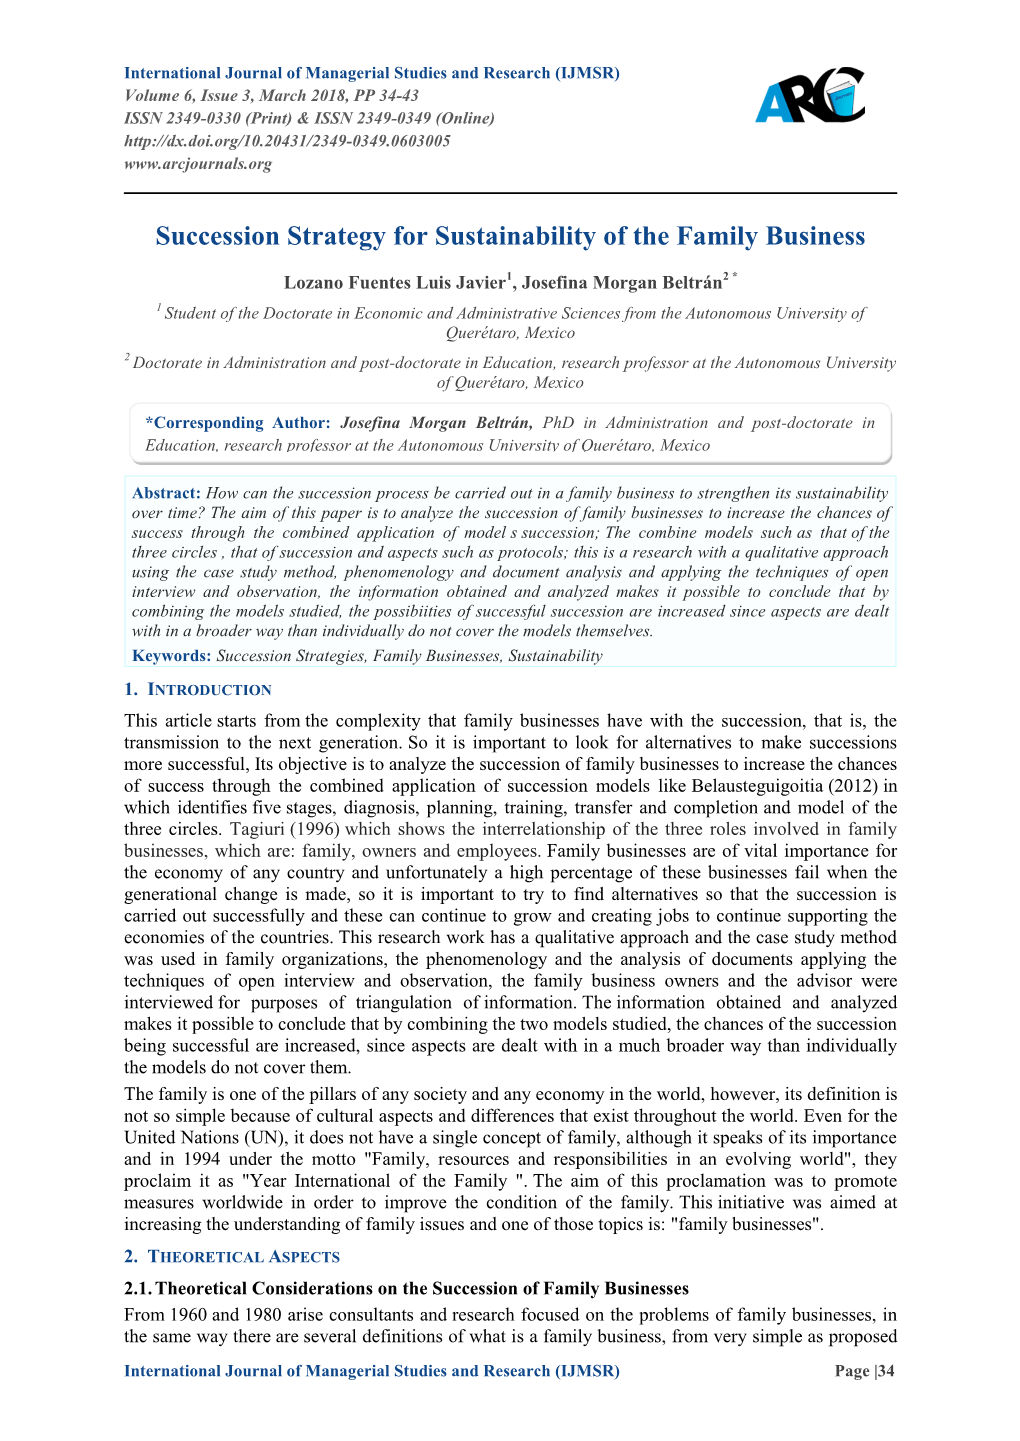 Succession Strategy for Sustainability of the Family Business